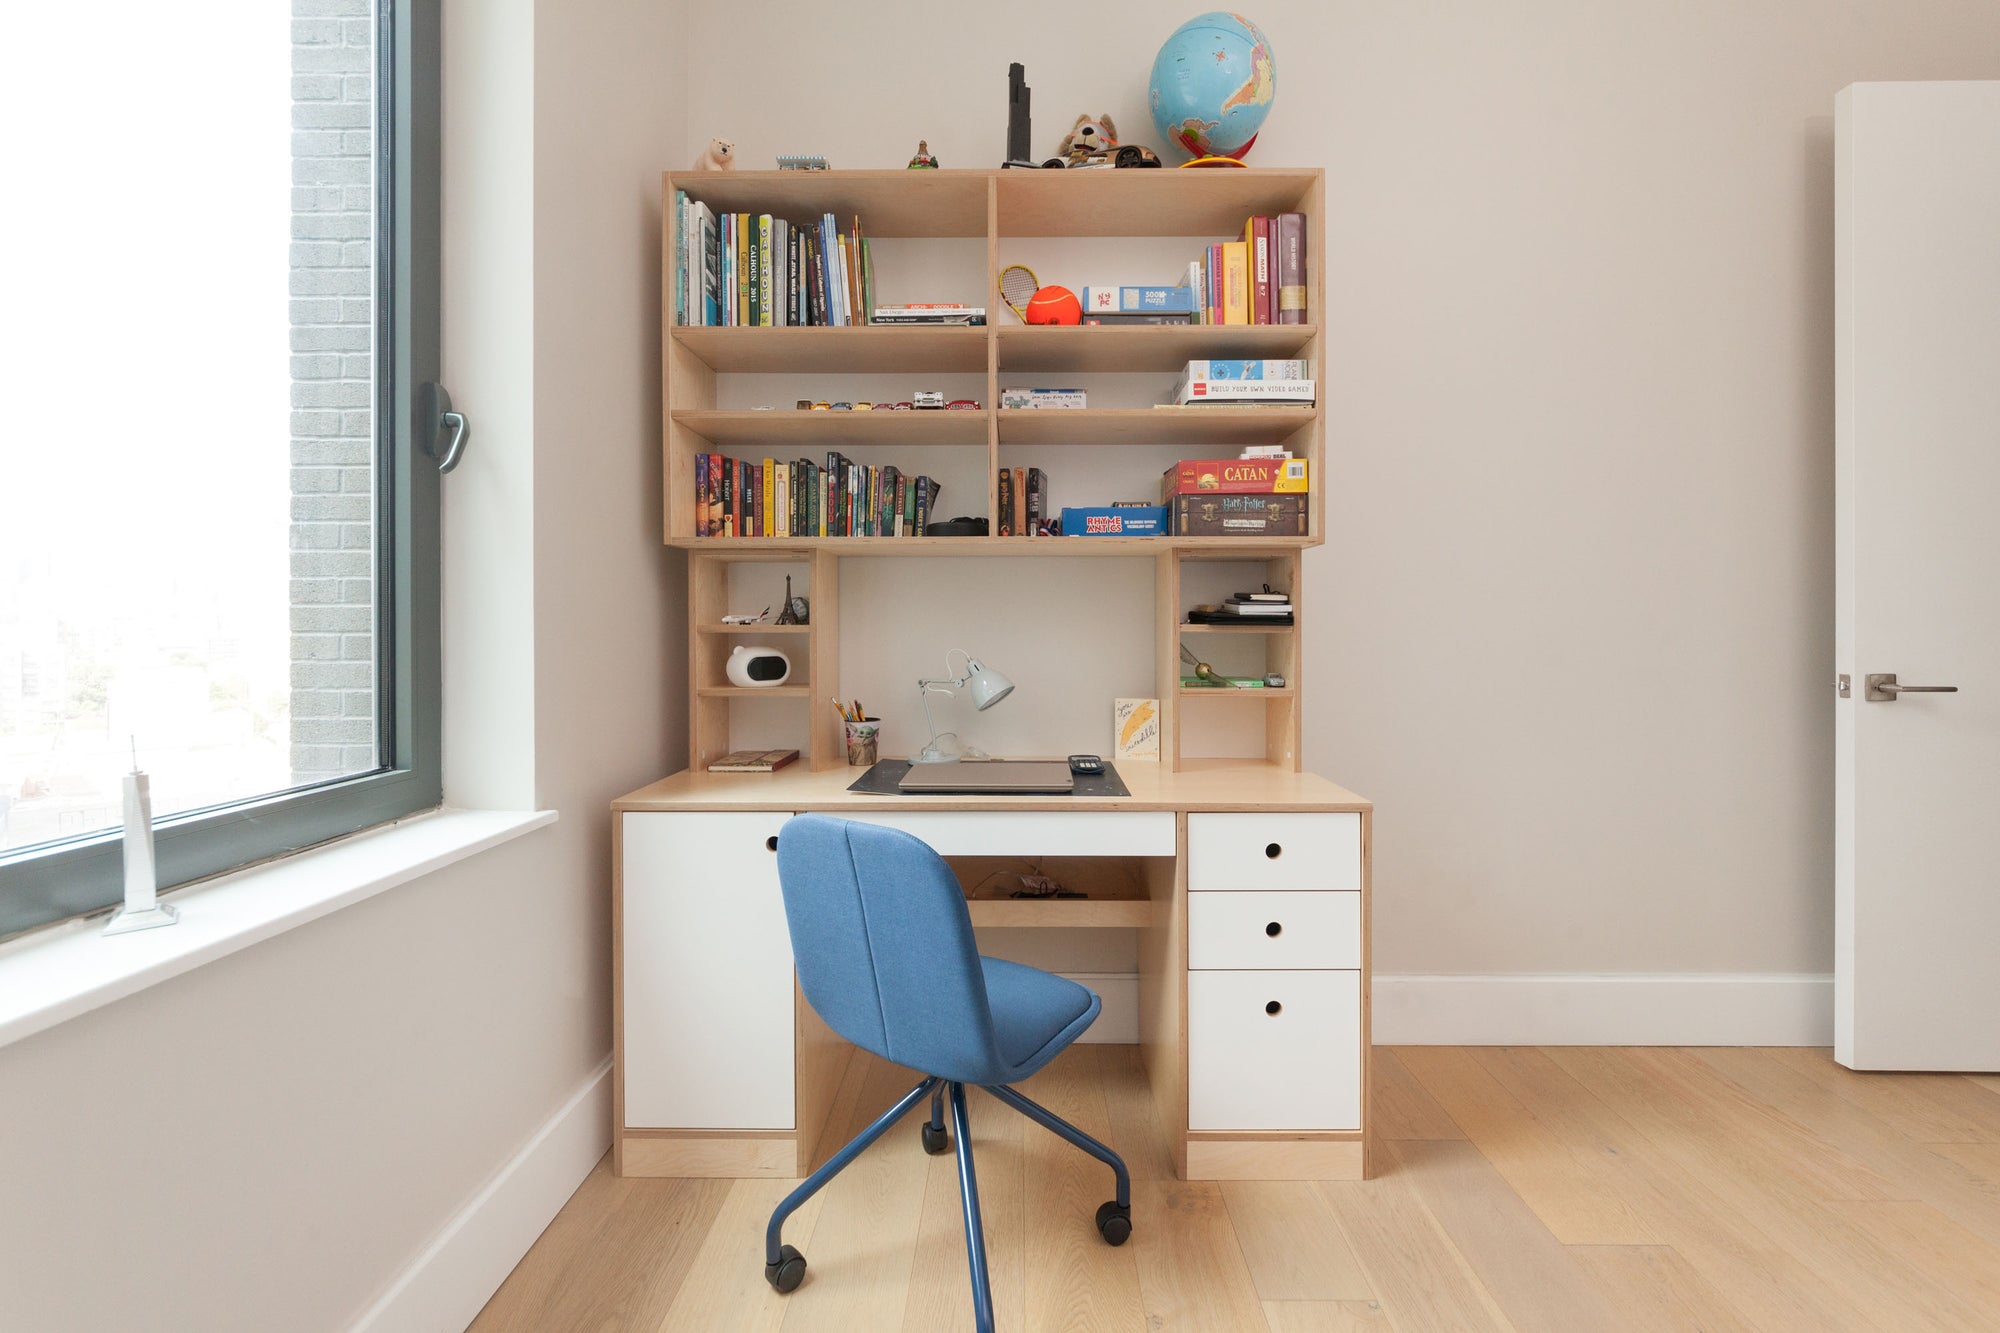 Modern study area with a wooden desk, shelves filled with books, a blue chair, and bright natural light.